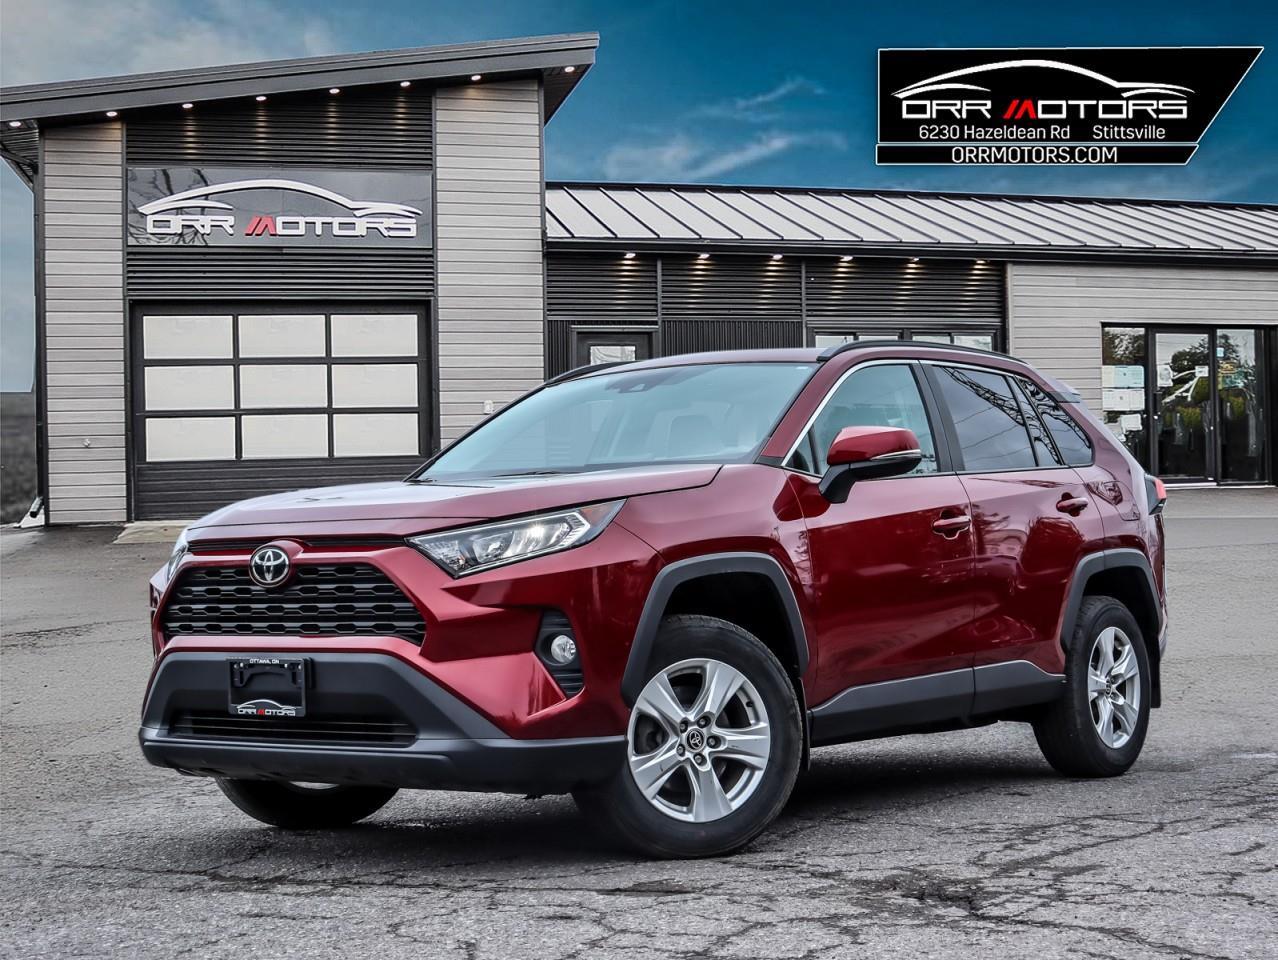 2021 Toyota RAV4 XLE **COMING SOON - CALL NOW TO RESERVE**